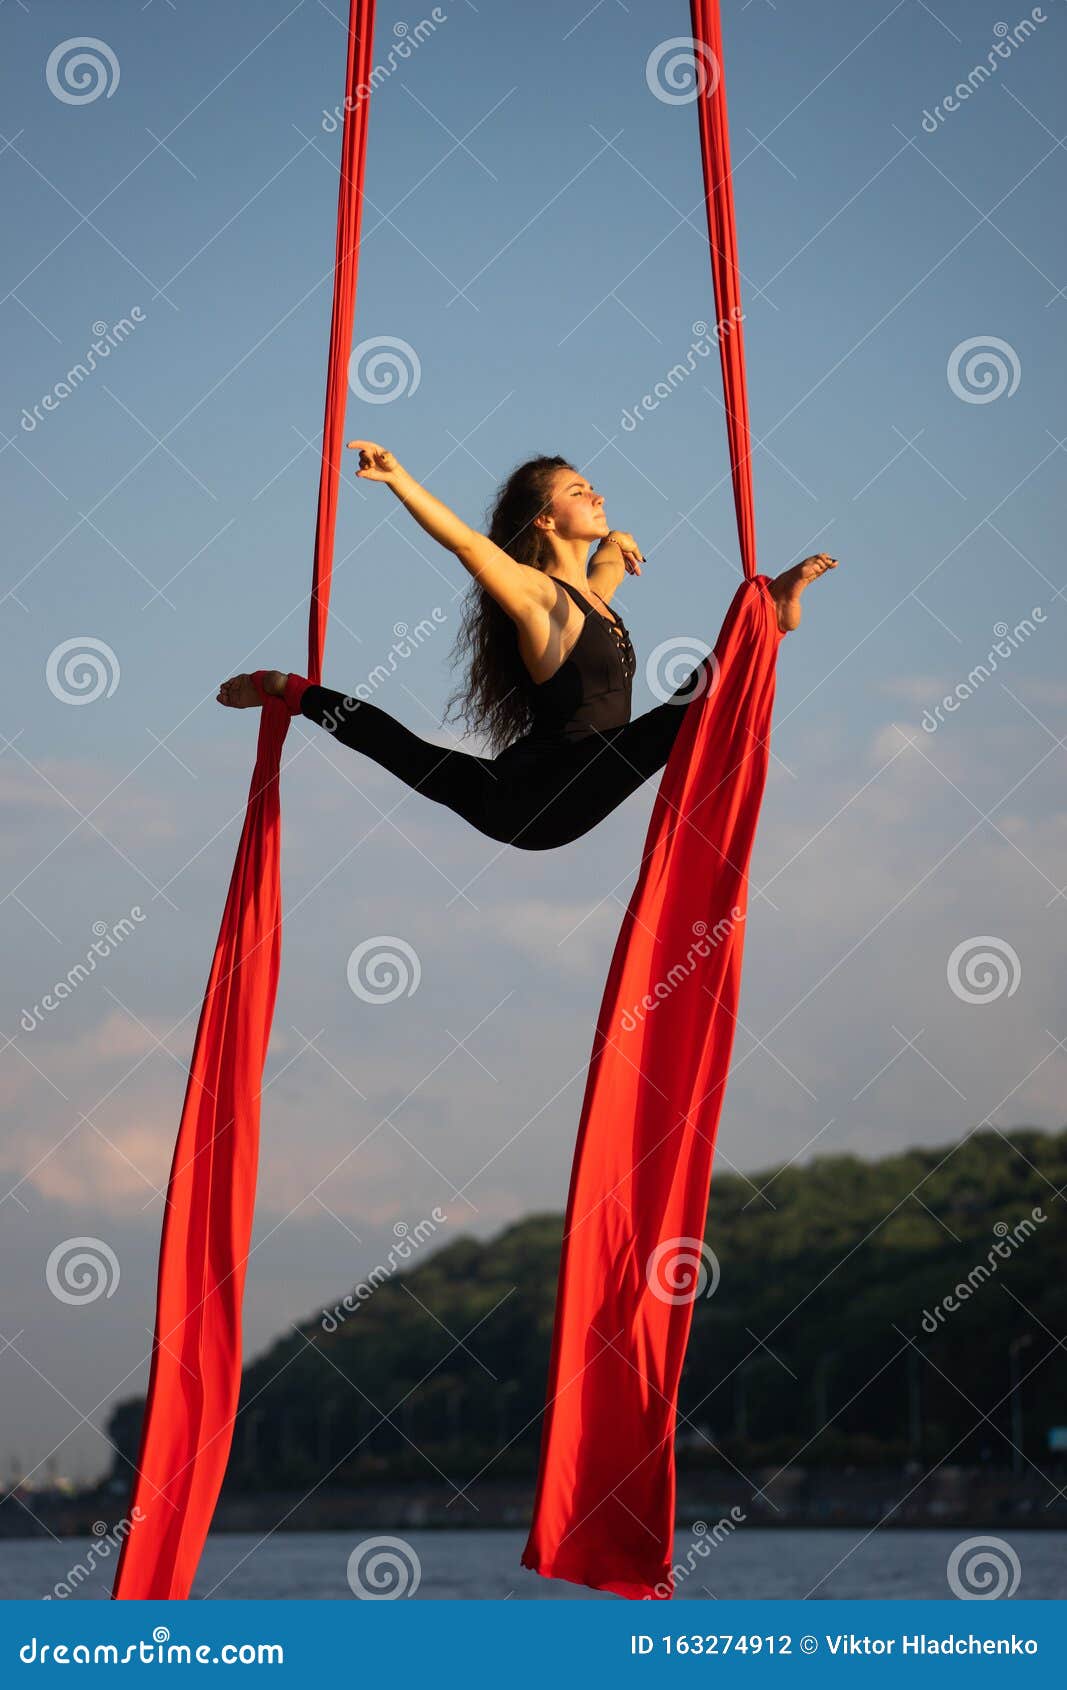 Beautiful And Flexible Female Circus Artist Dancing With Aerial Silk With Sky And River